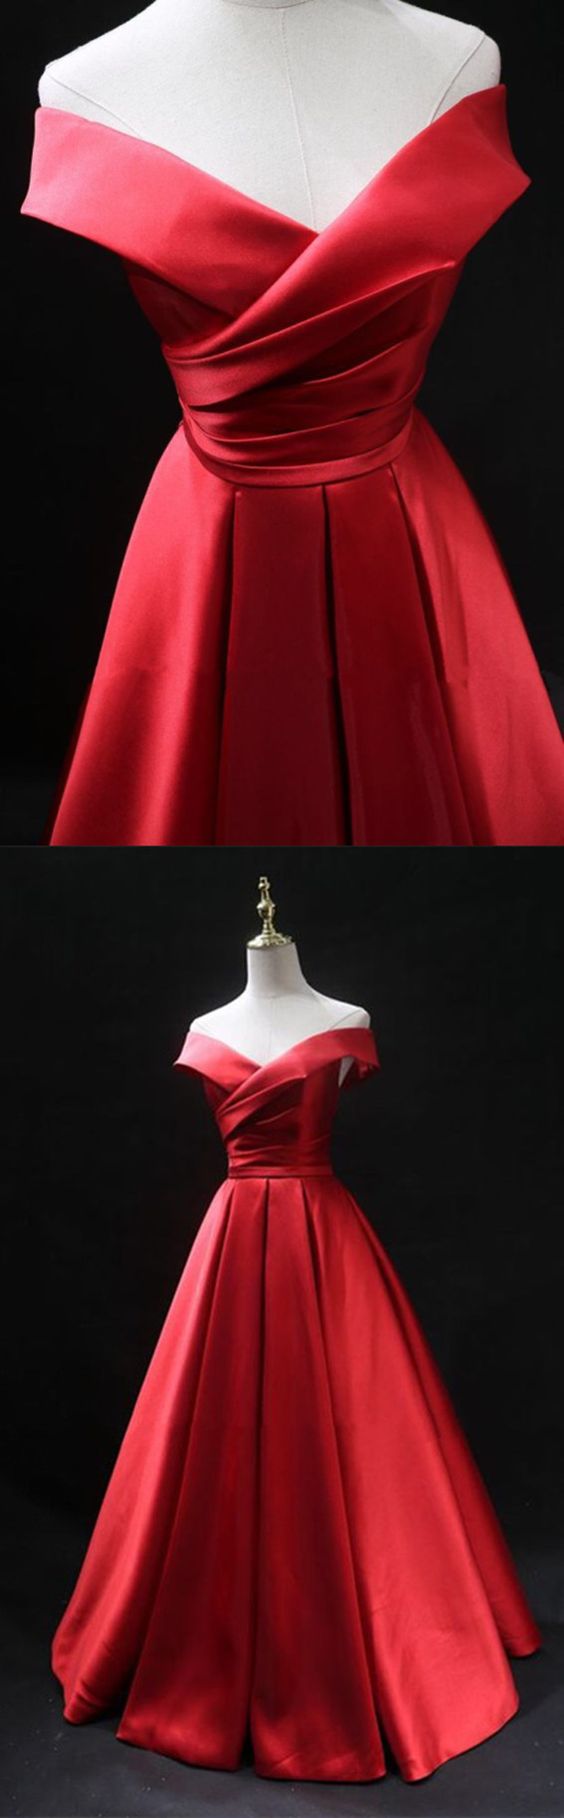 Sexy A Line Red Satin Ruffle Formal Prom Dress Off Shoulder Long Prom Party Gowns .fashion Women Evening Dress